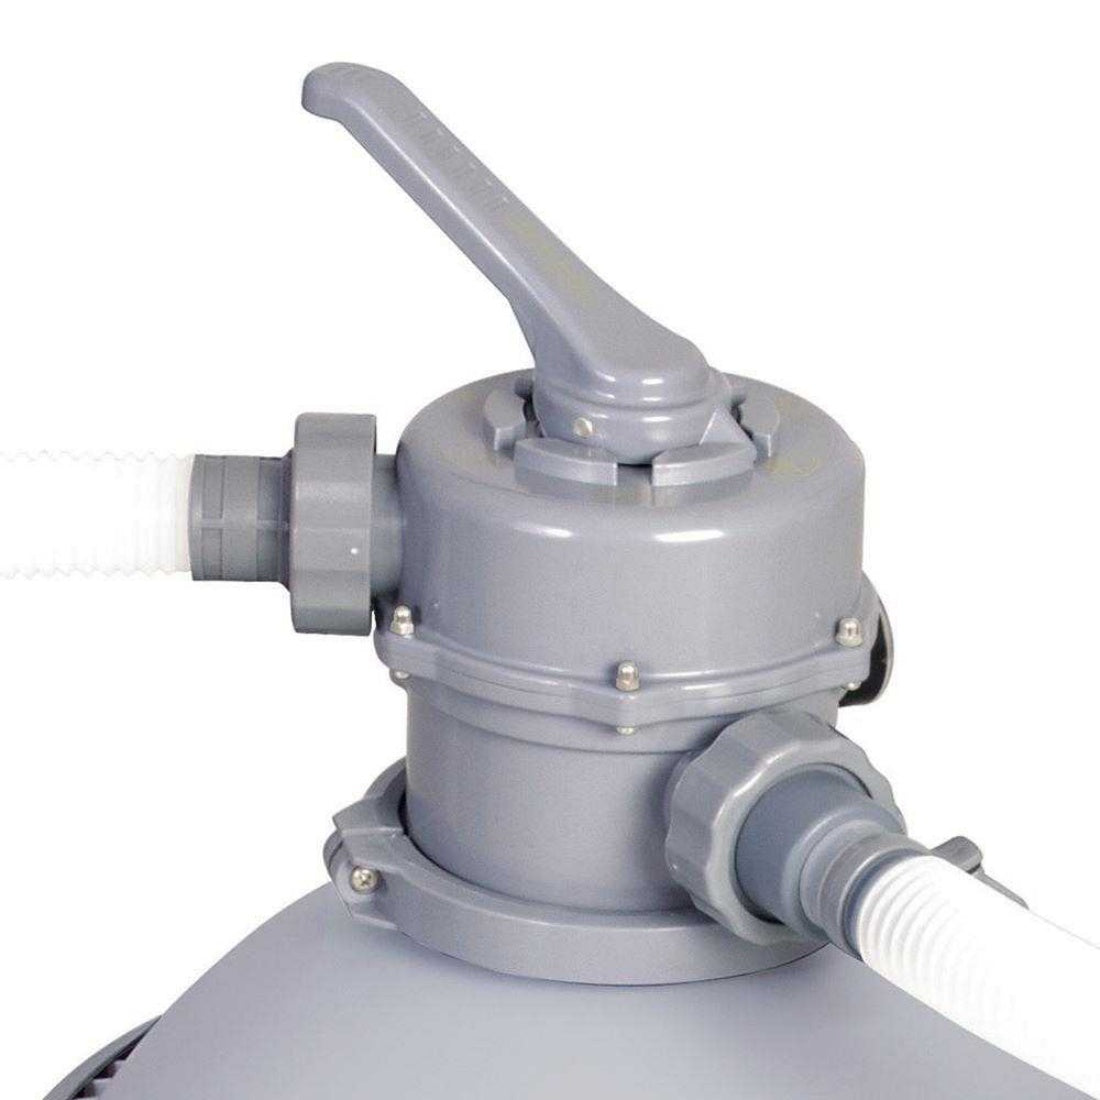 Bestway 2000gph Sand Filter Pump 58315 For Above Ground Swimming Pool